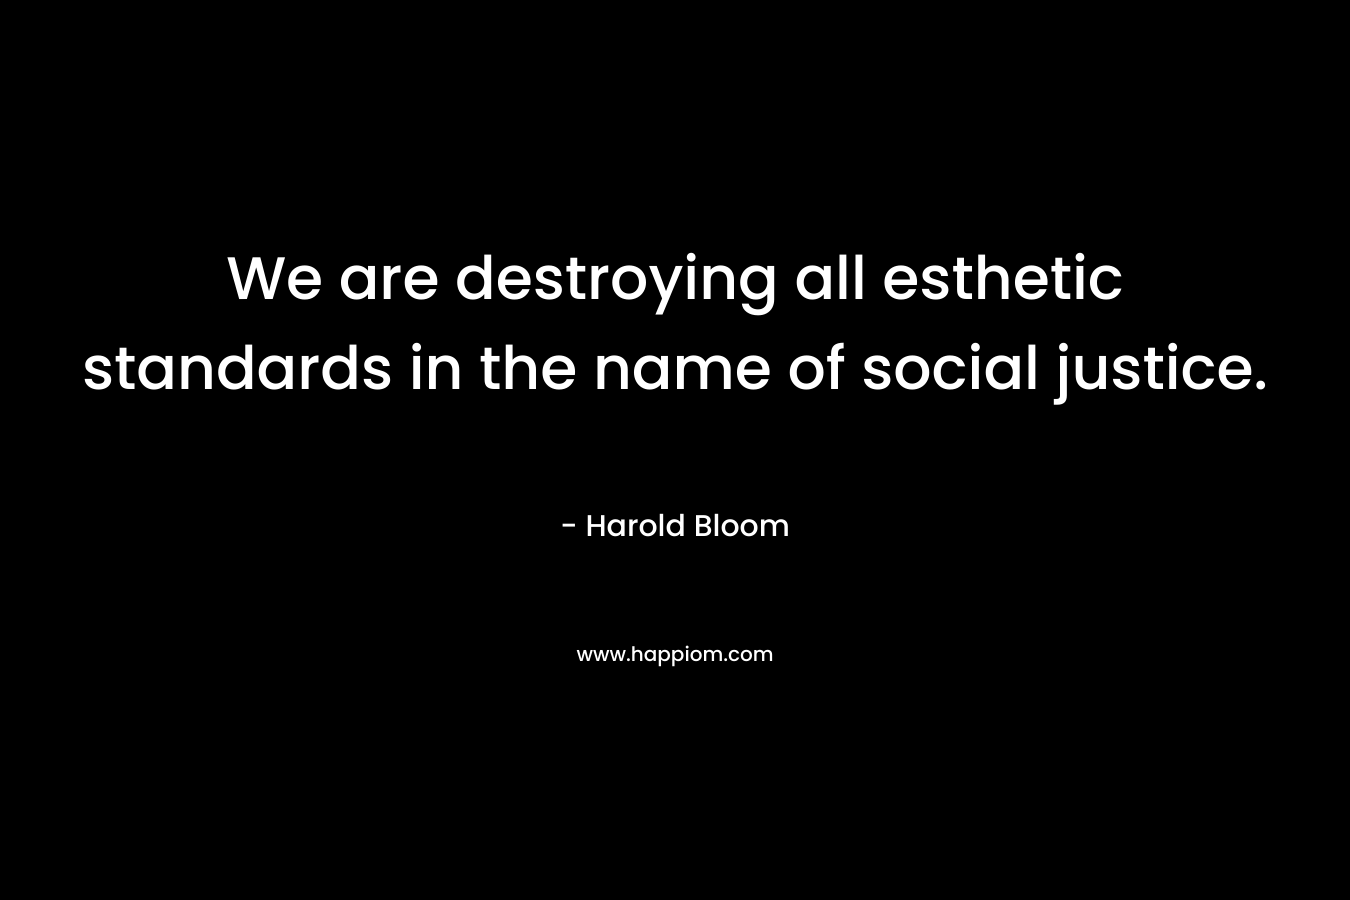 We are destroying all esthetic standards in the name of social justice. – Harold Bloom